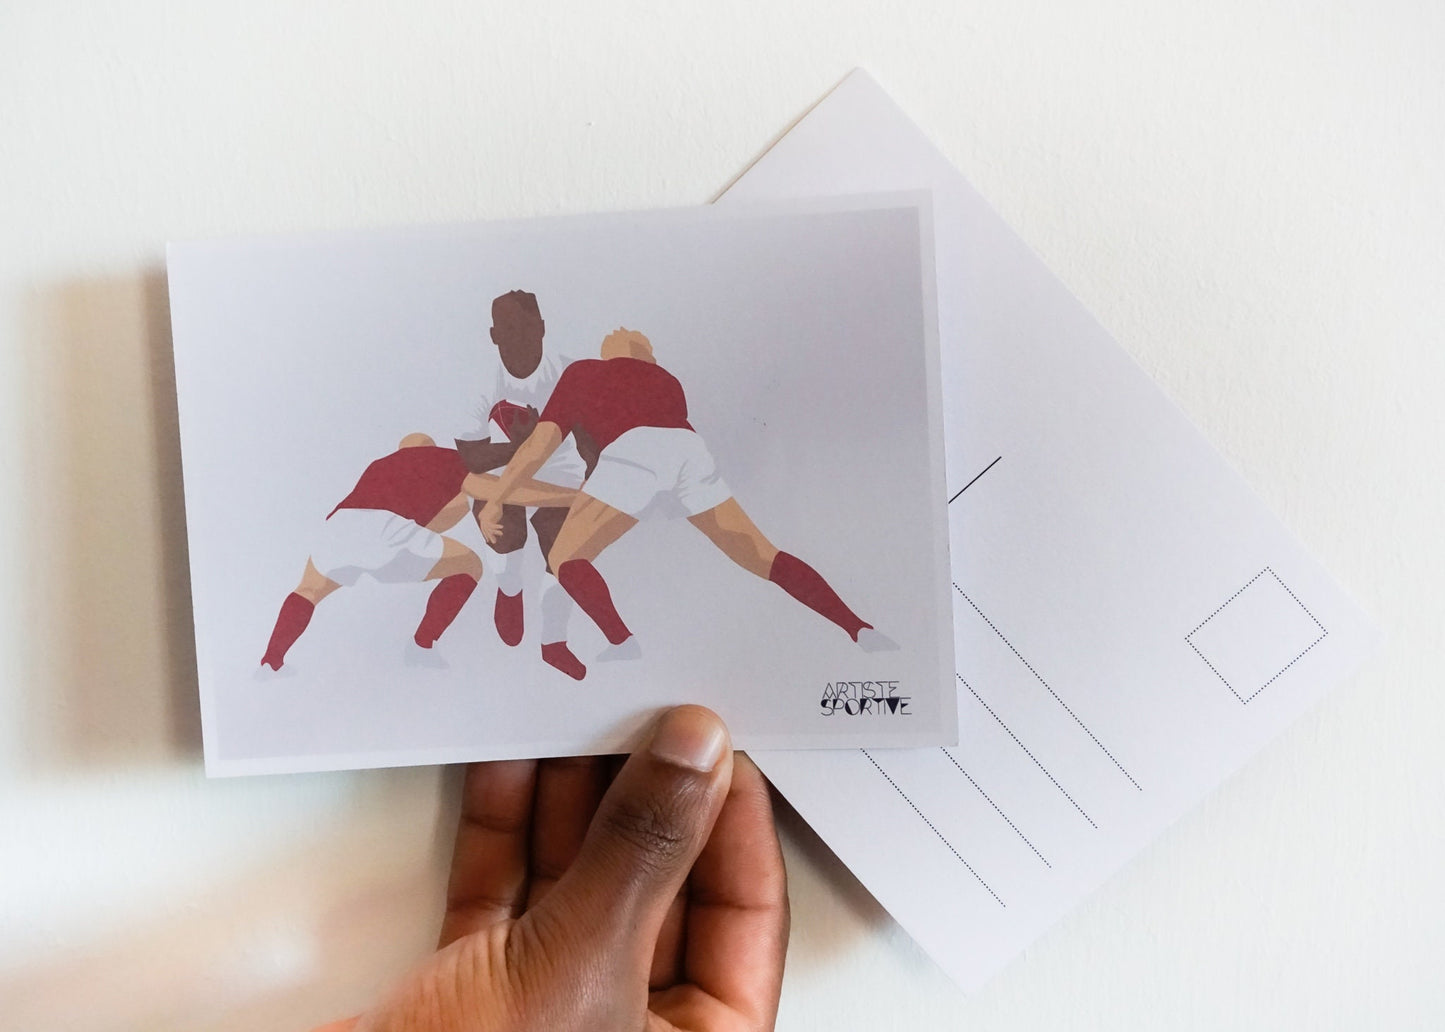 Red and White Rugby Card | rugby card | Sports Artist